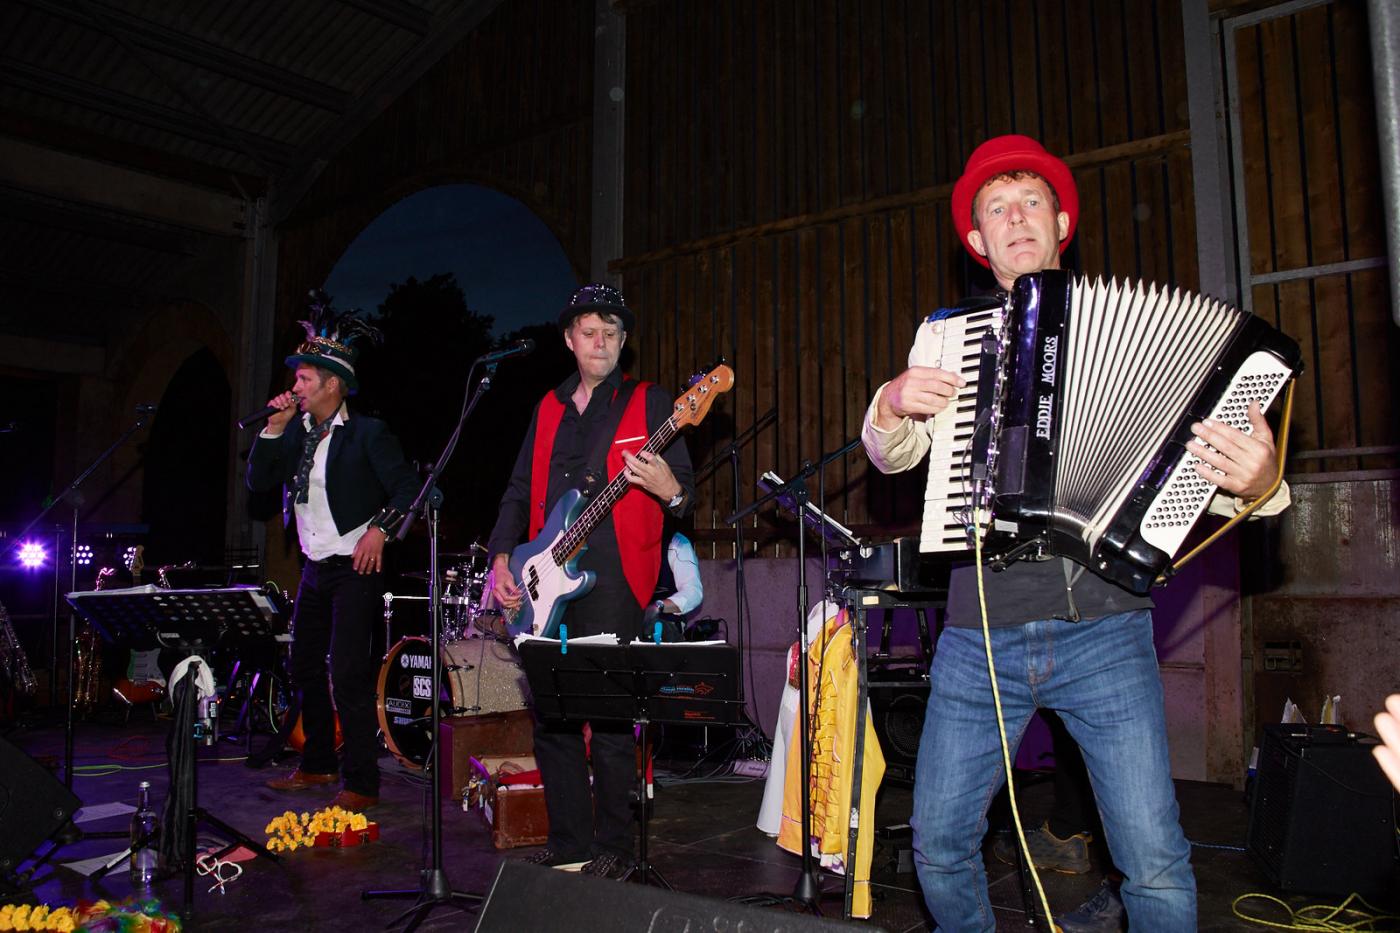 The Curious LITTLE Big Band with accordion player